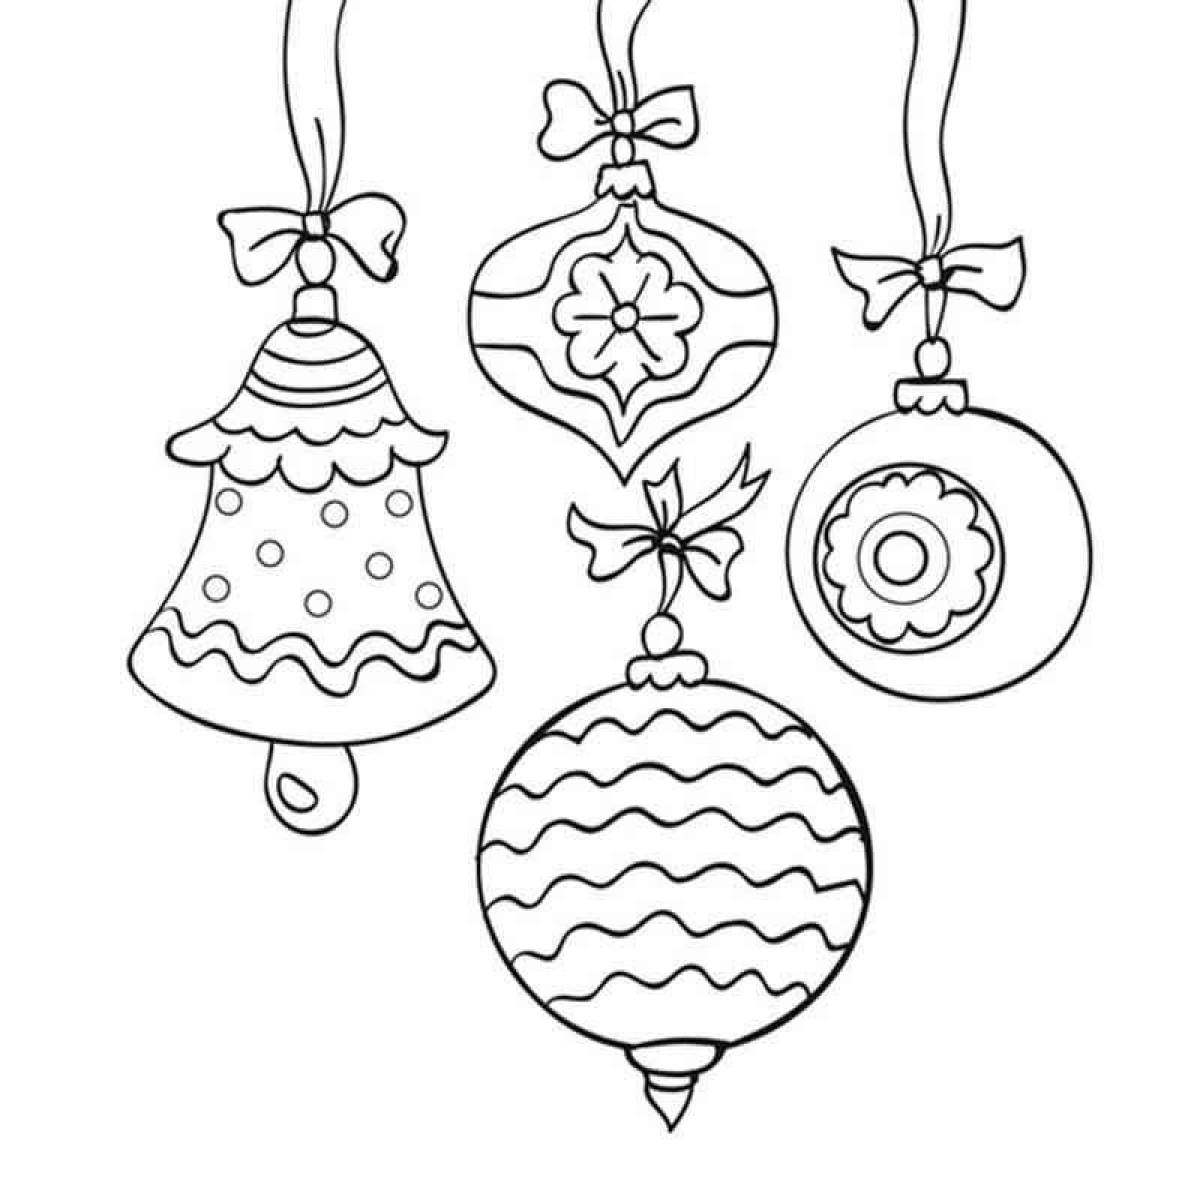 Christmas ball coloring pages for kids